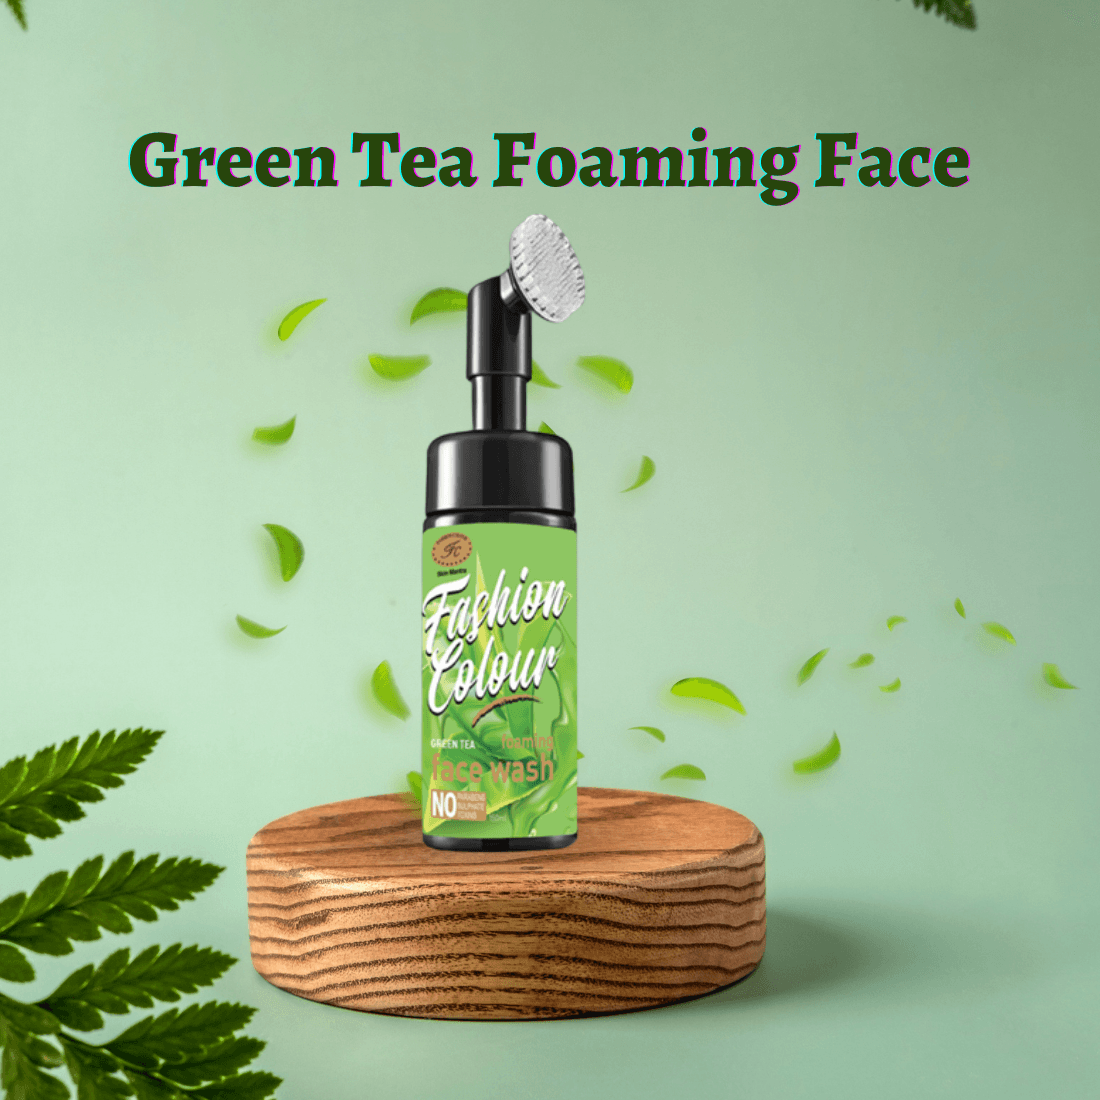 GREEN TEA Foaming Face Wash With Built in Face Brush For Deep Cleansing and Healthy Skin foaming face wash green tea face wash green tea foaming face wash facial foam acne foaming cream cleanser tea tree foaming face wash fash foam face wash clean & clear foaming face wash face shop face wash best foaming face wash best foaming cleanser foaming face wash for oily skin whitening facial foam foaming cleanser for oily skin green tea face cleanser acne foaming wash foaming wash green tea pore cleanser